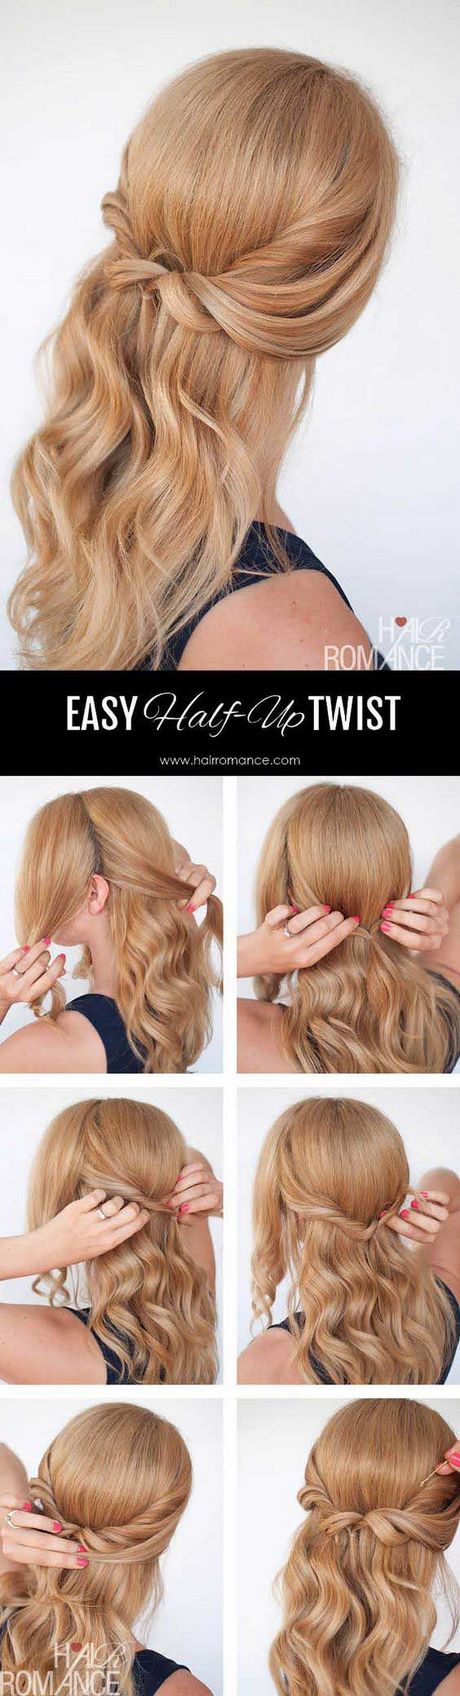 Easy hairstyle ideas for long hair easy-hairstyle-ideas-for-long-hair-92